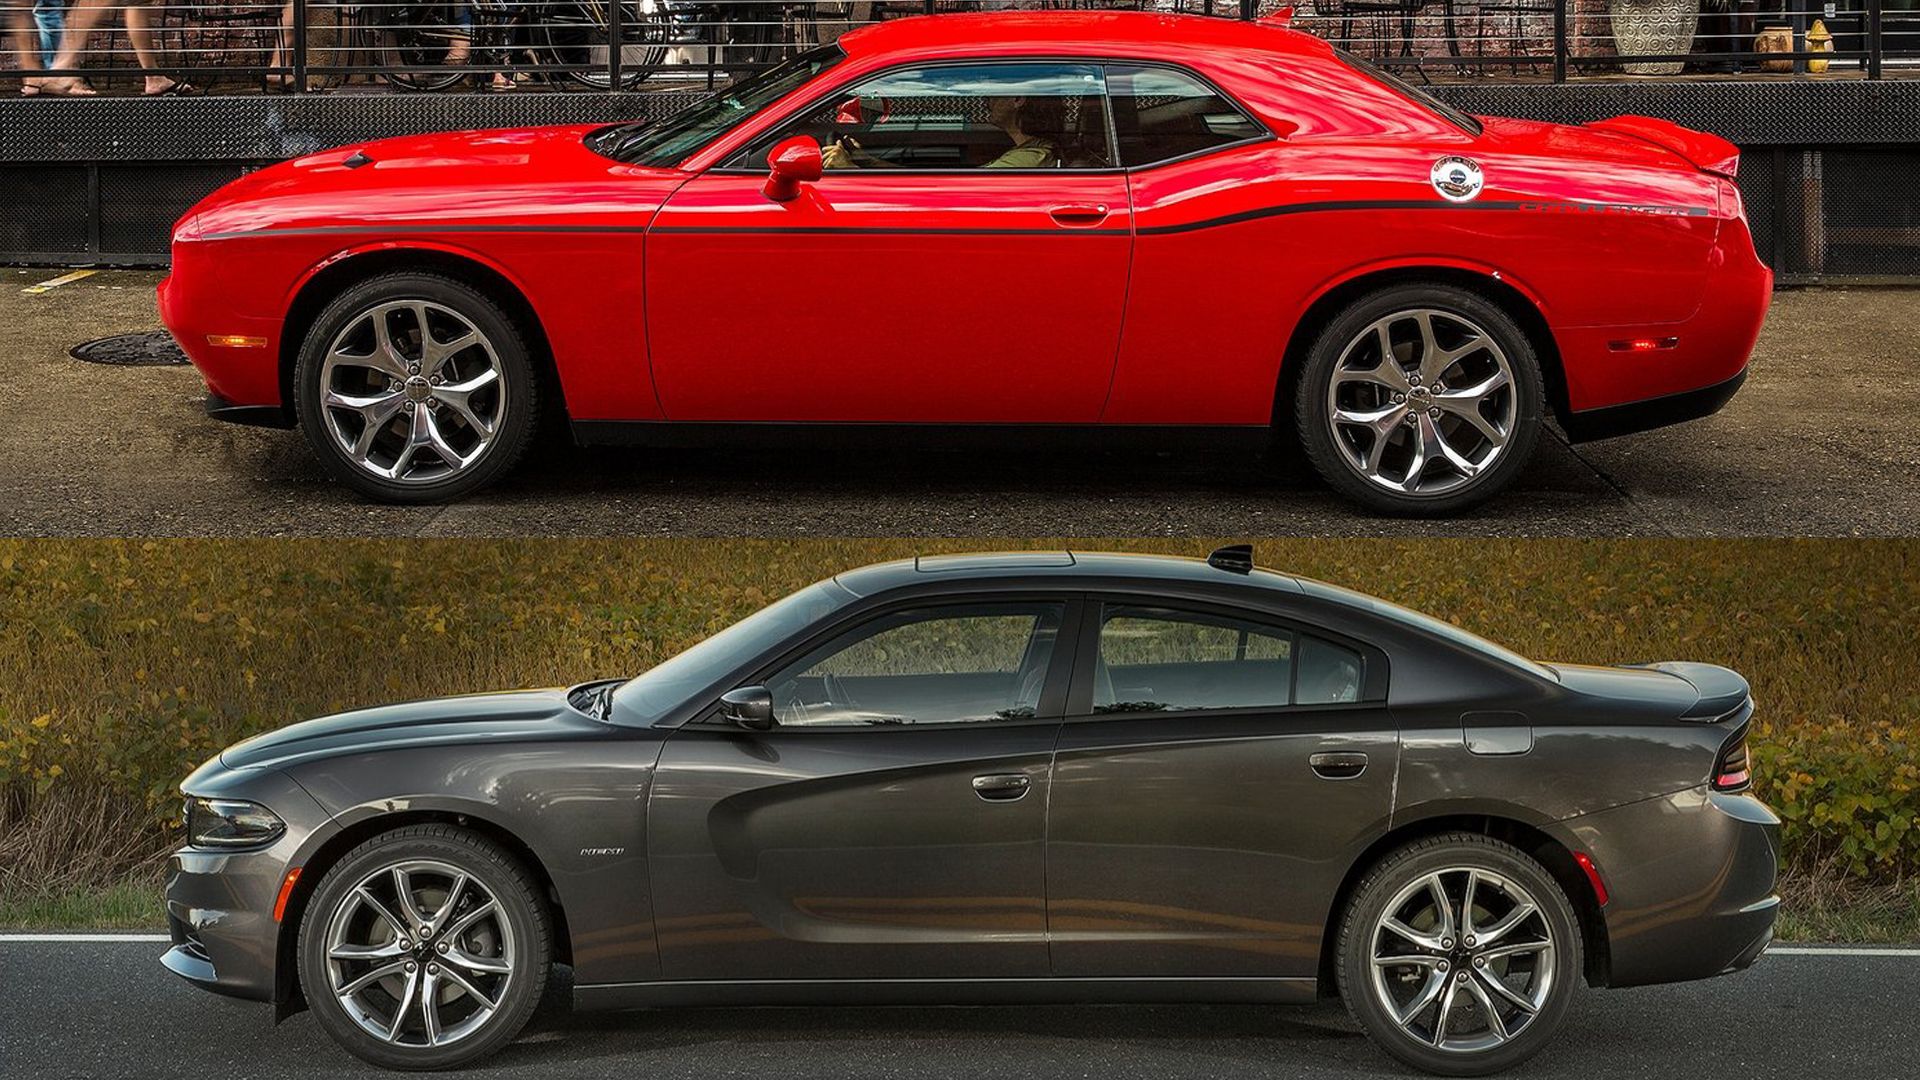 Dodge Challenger Vs Charger Choosing The Right Muscle Car For You